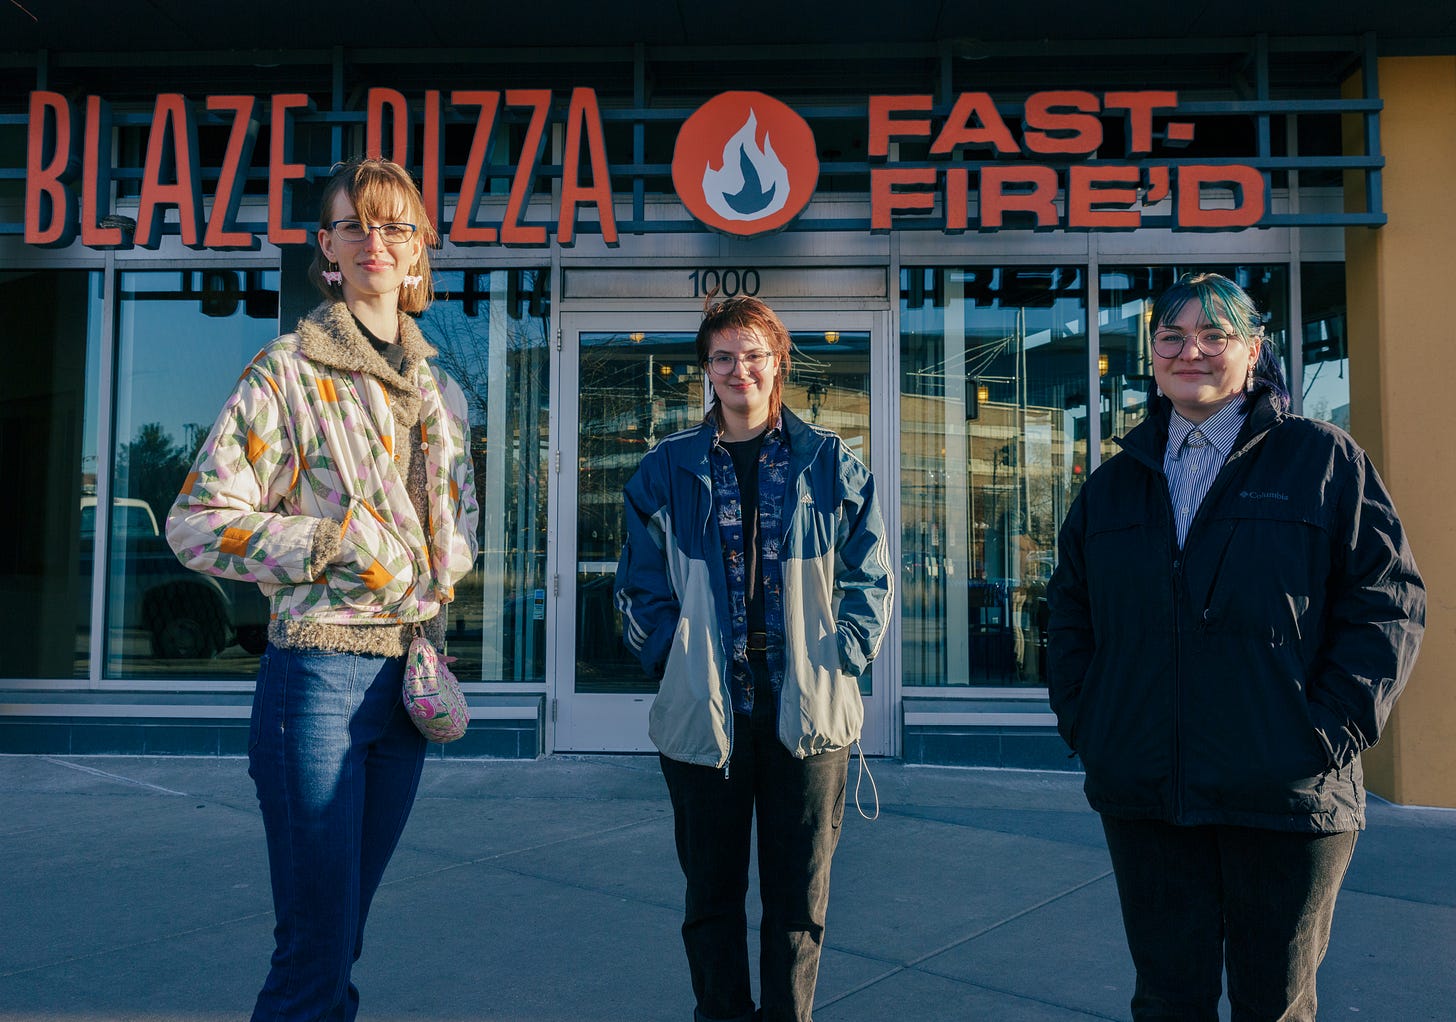 three people stand in front of the blaze pizza fast food store front wearing quilted and denim jackets